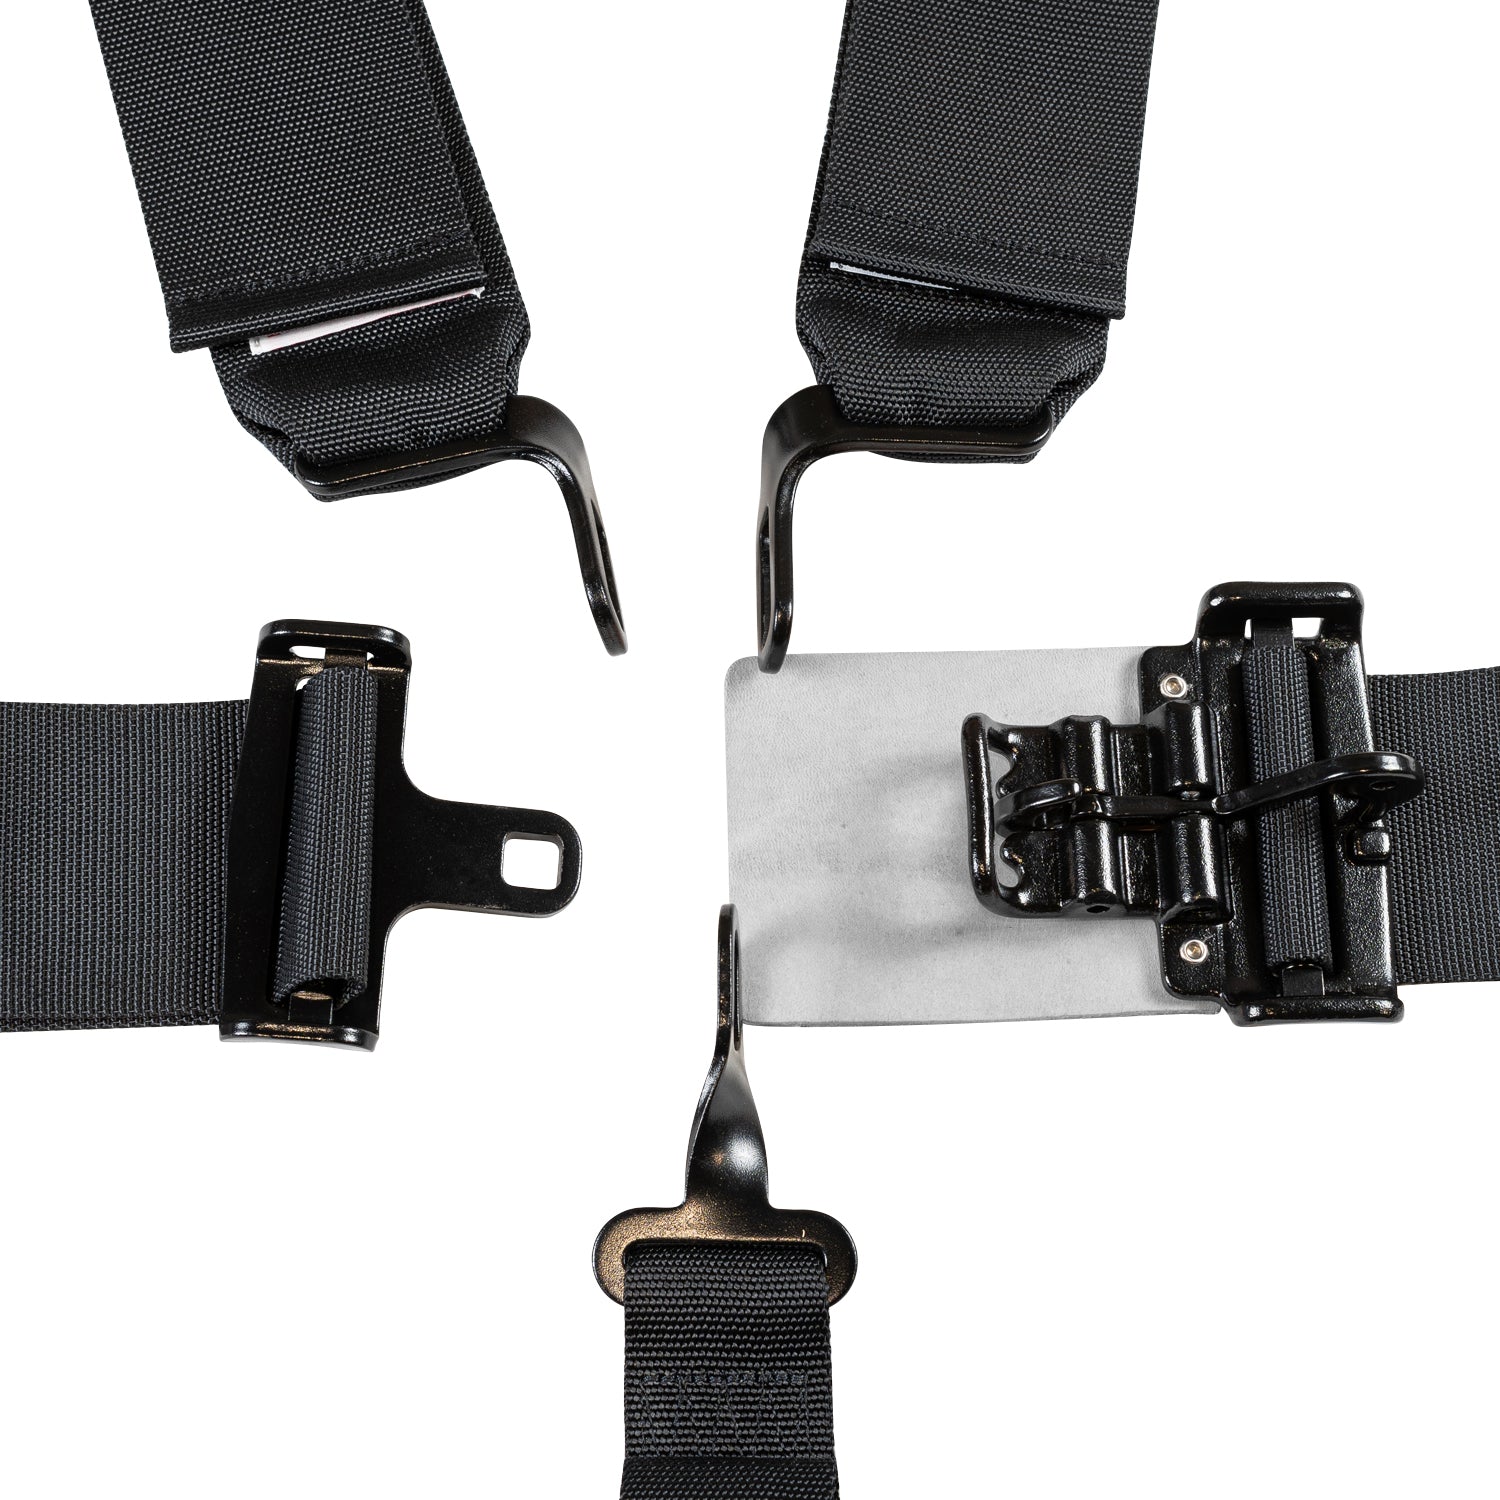 Zamp SFI 16.1 3"/2" 5-Point Pull-Down(Out) Seat Harness